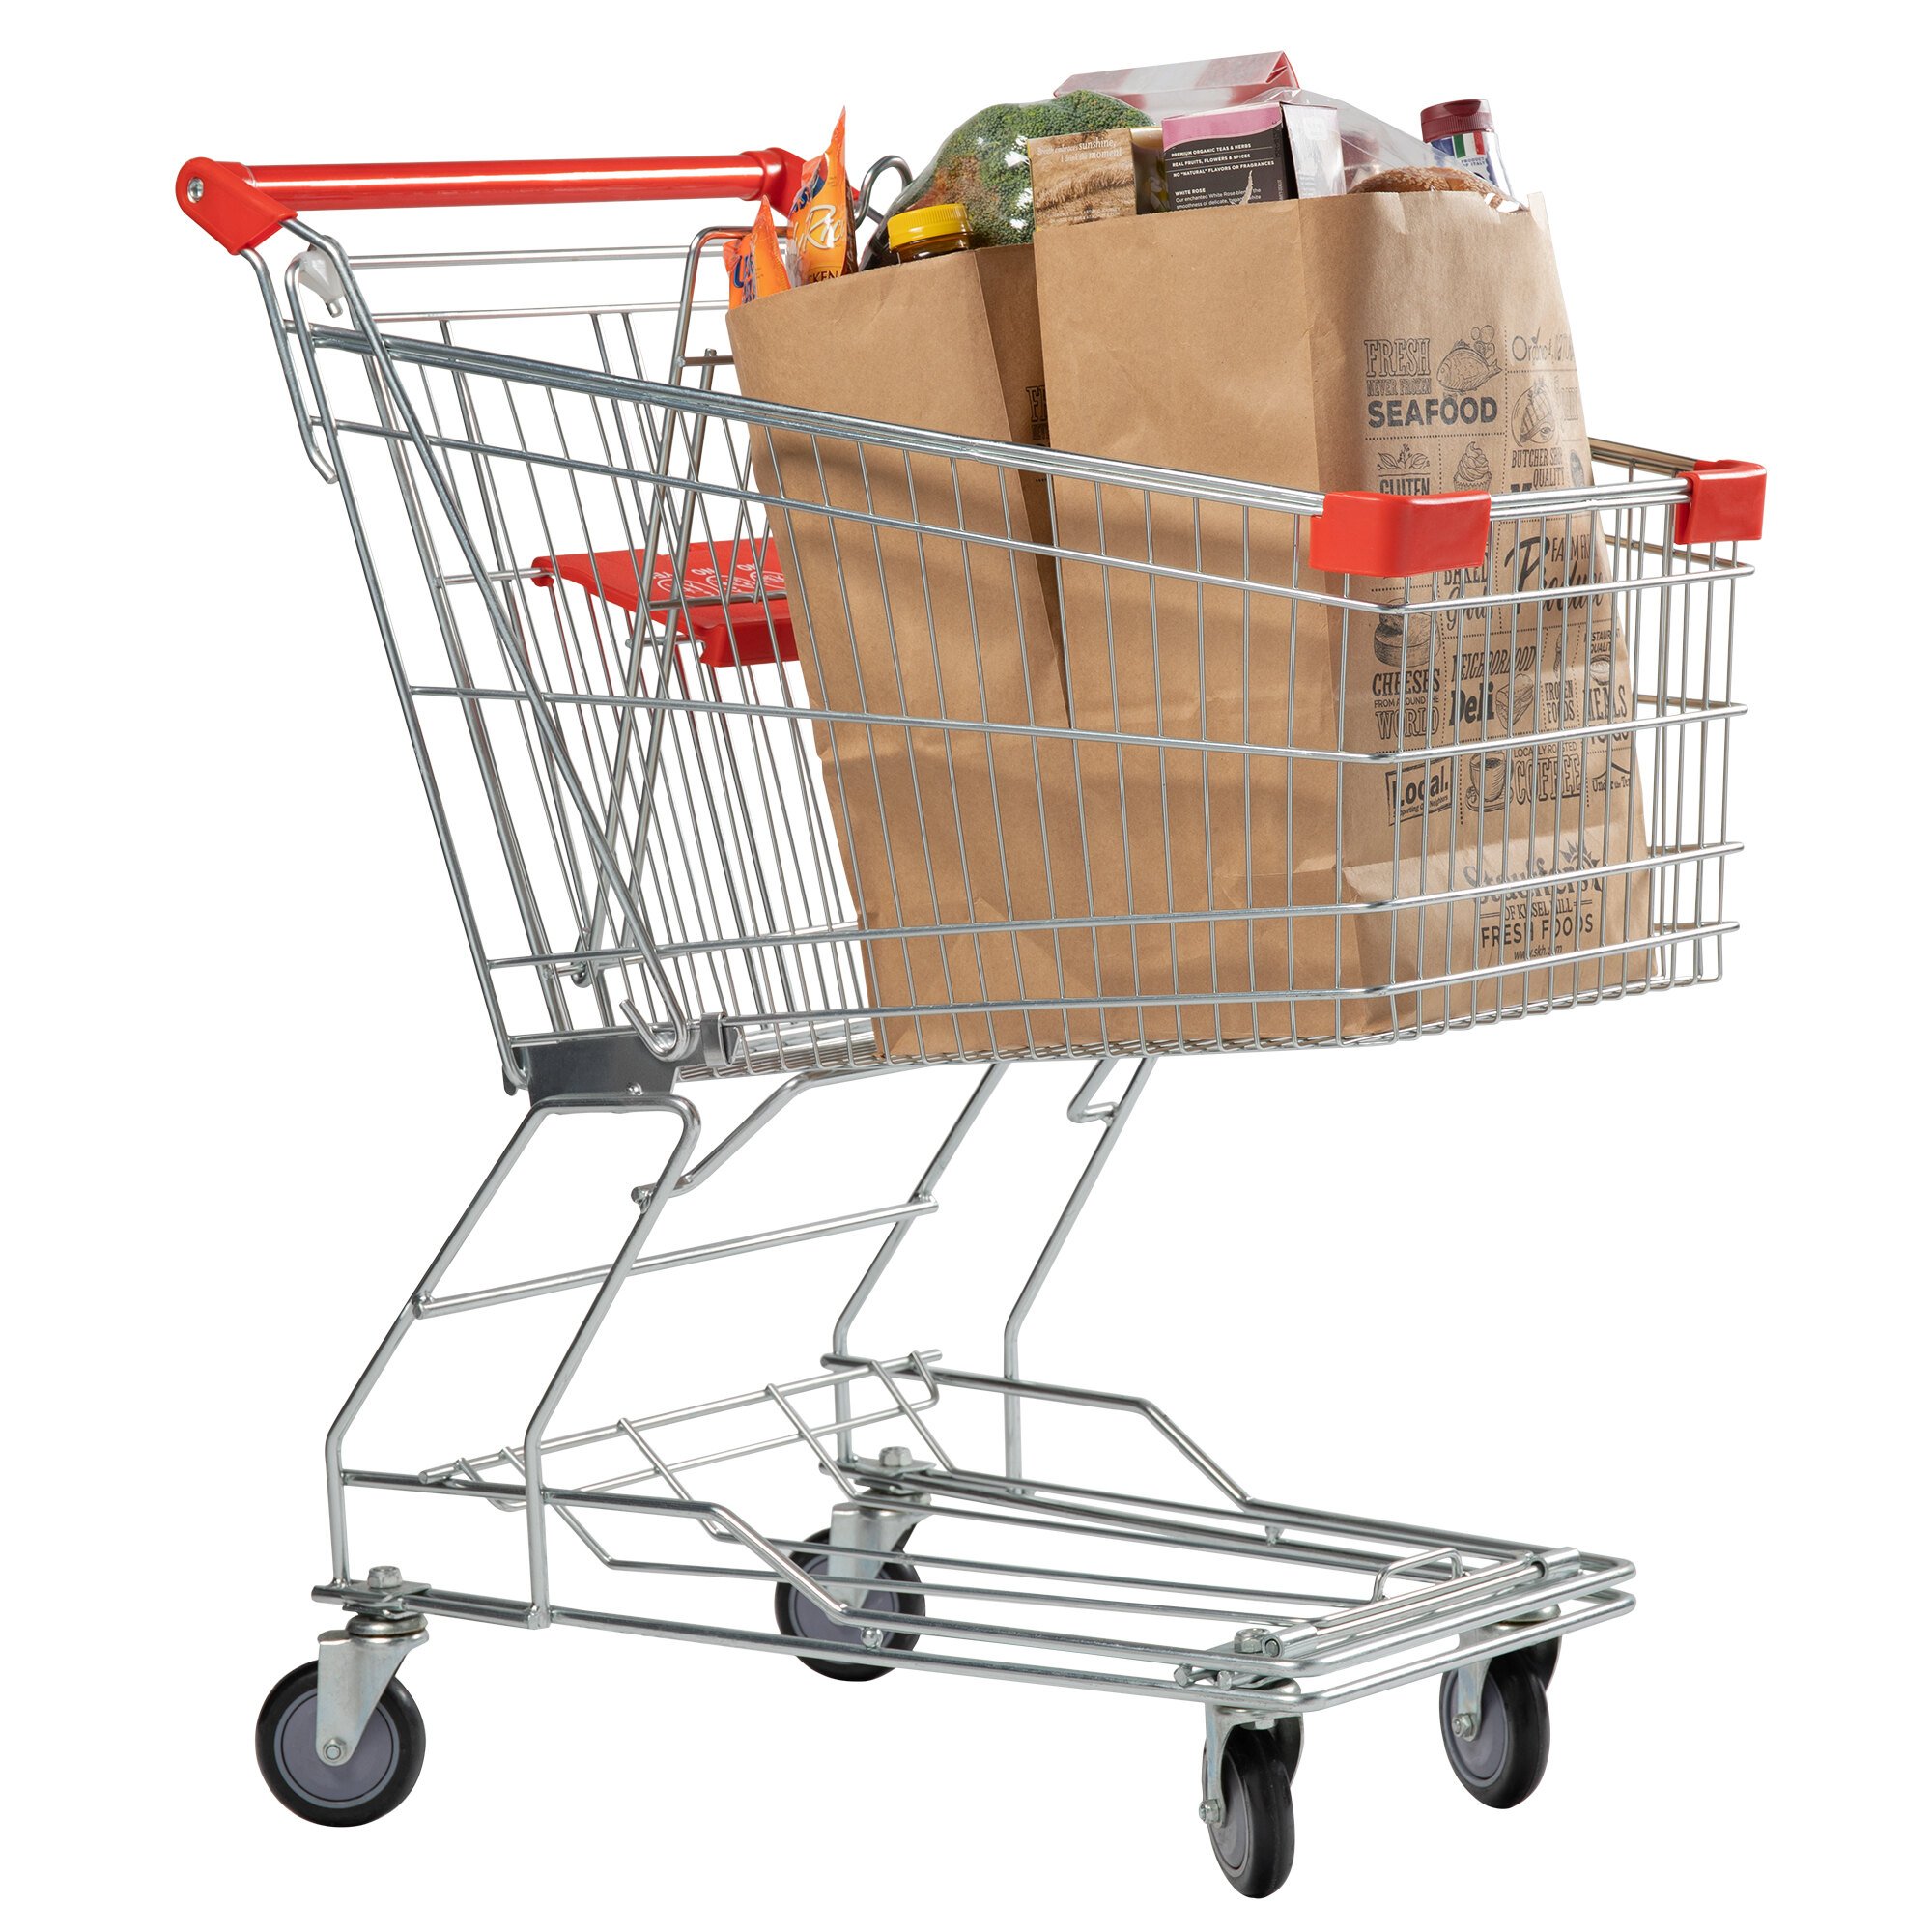 List 99+ Pictures Pictures Of Shopping Carts Latest